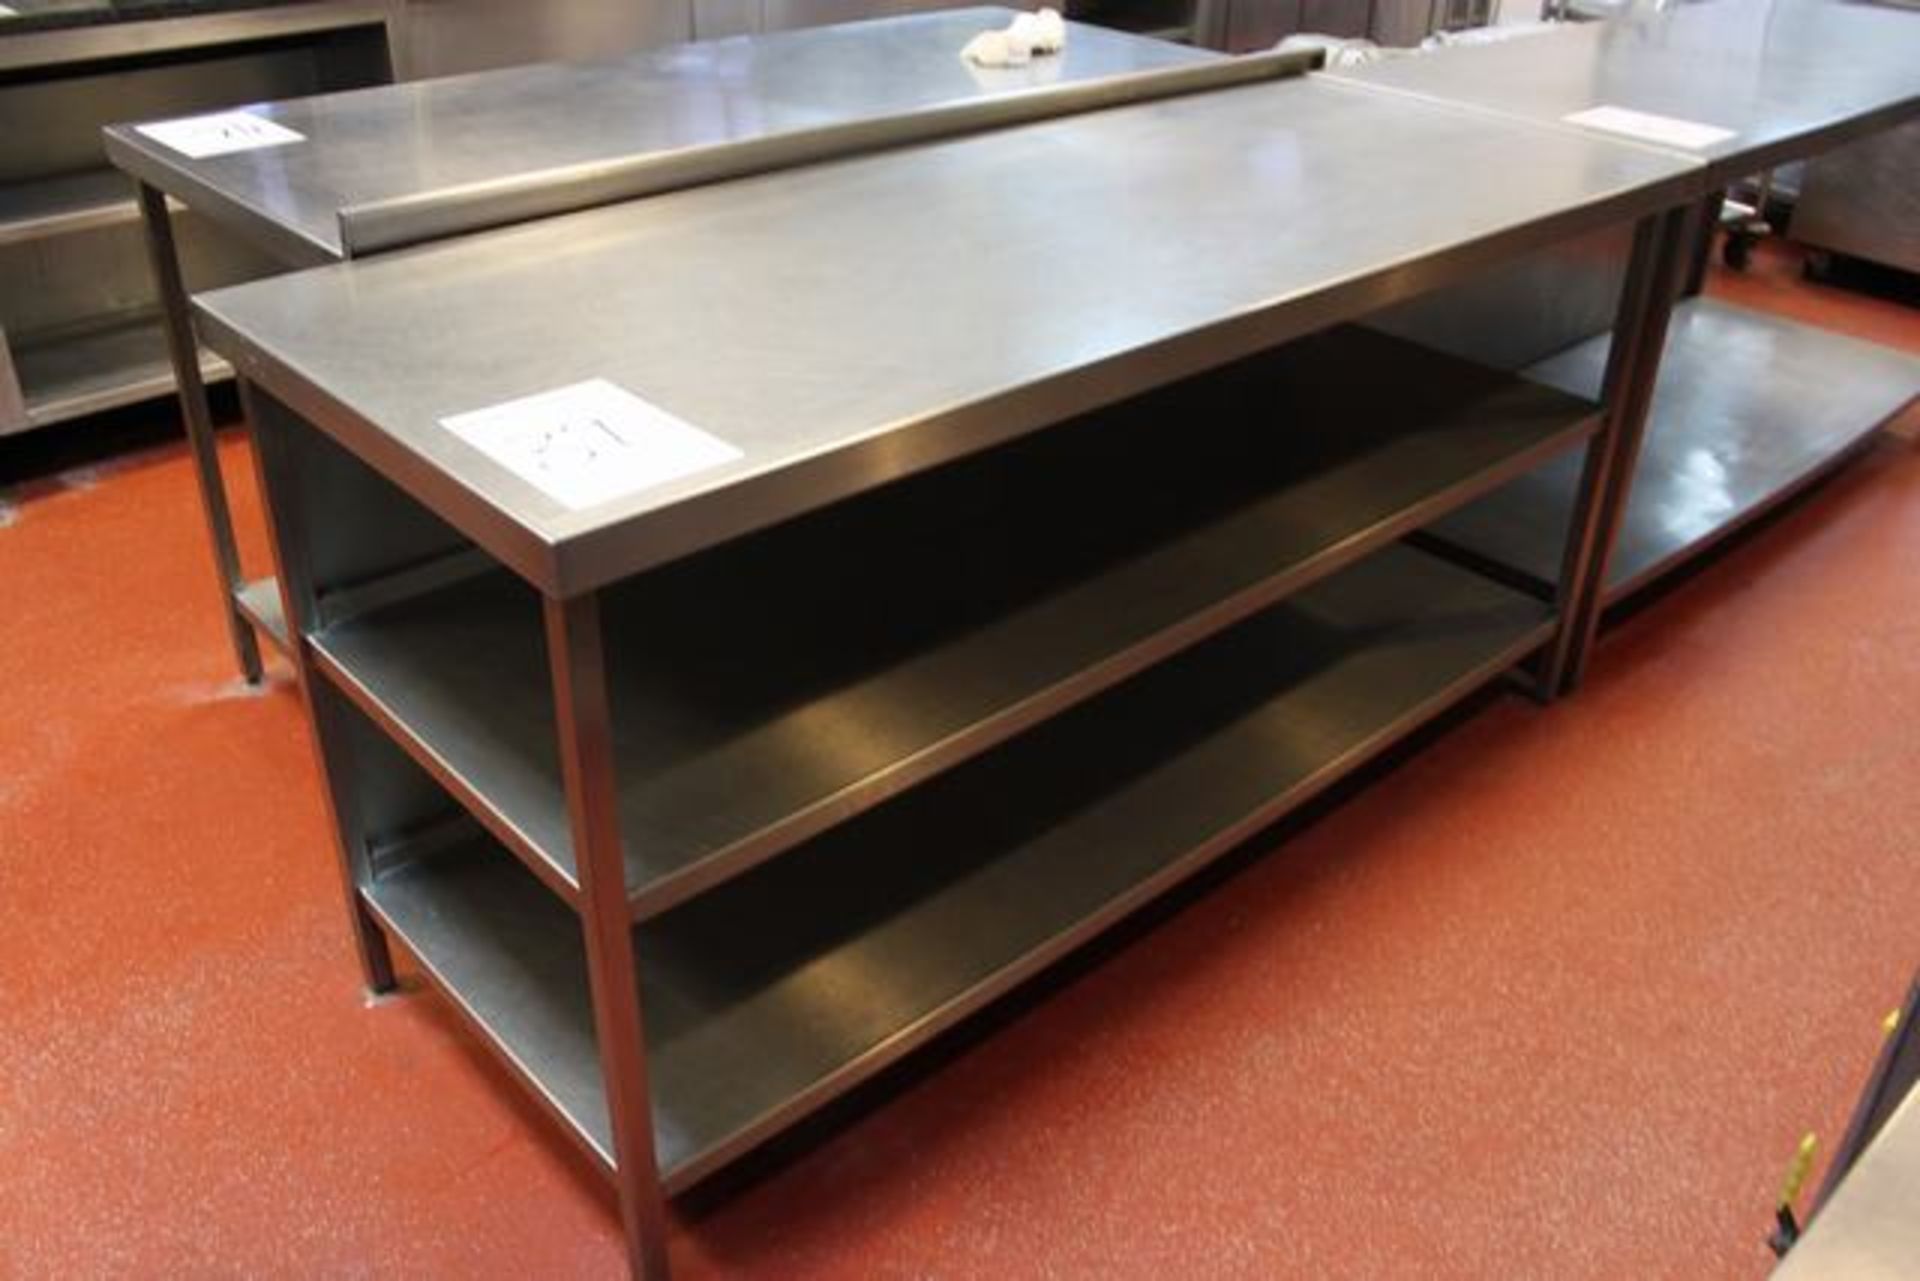 Stainless steel preparation  table with twin undershelf 1800mm x 700mm  Lift out charge  5